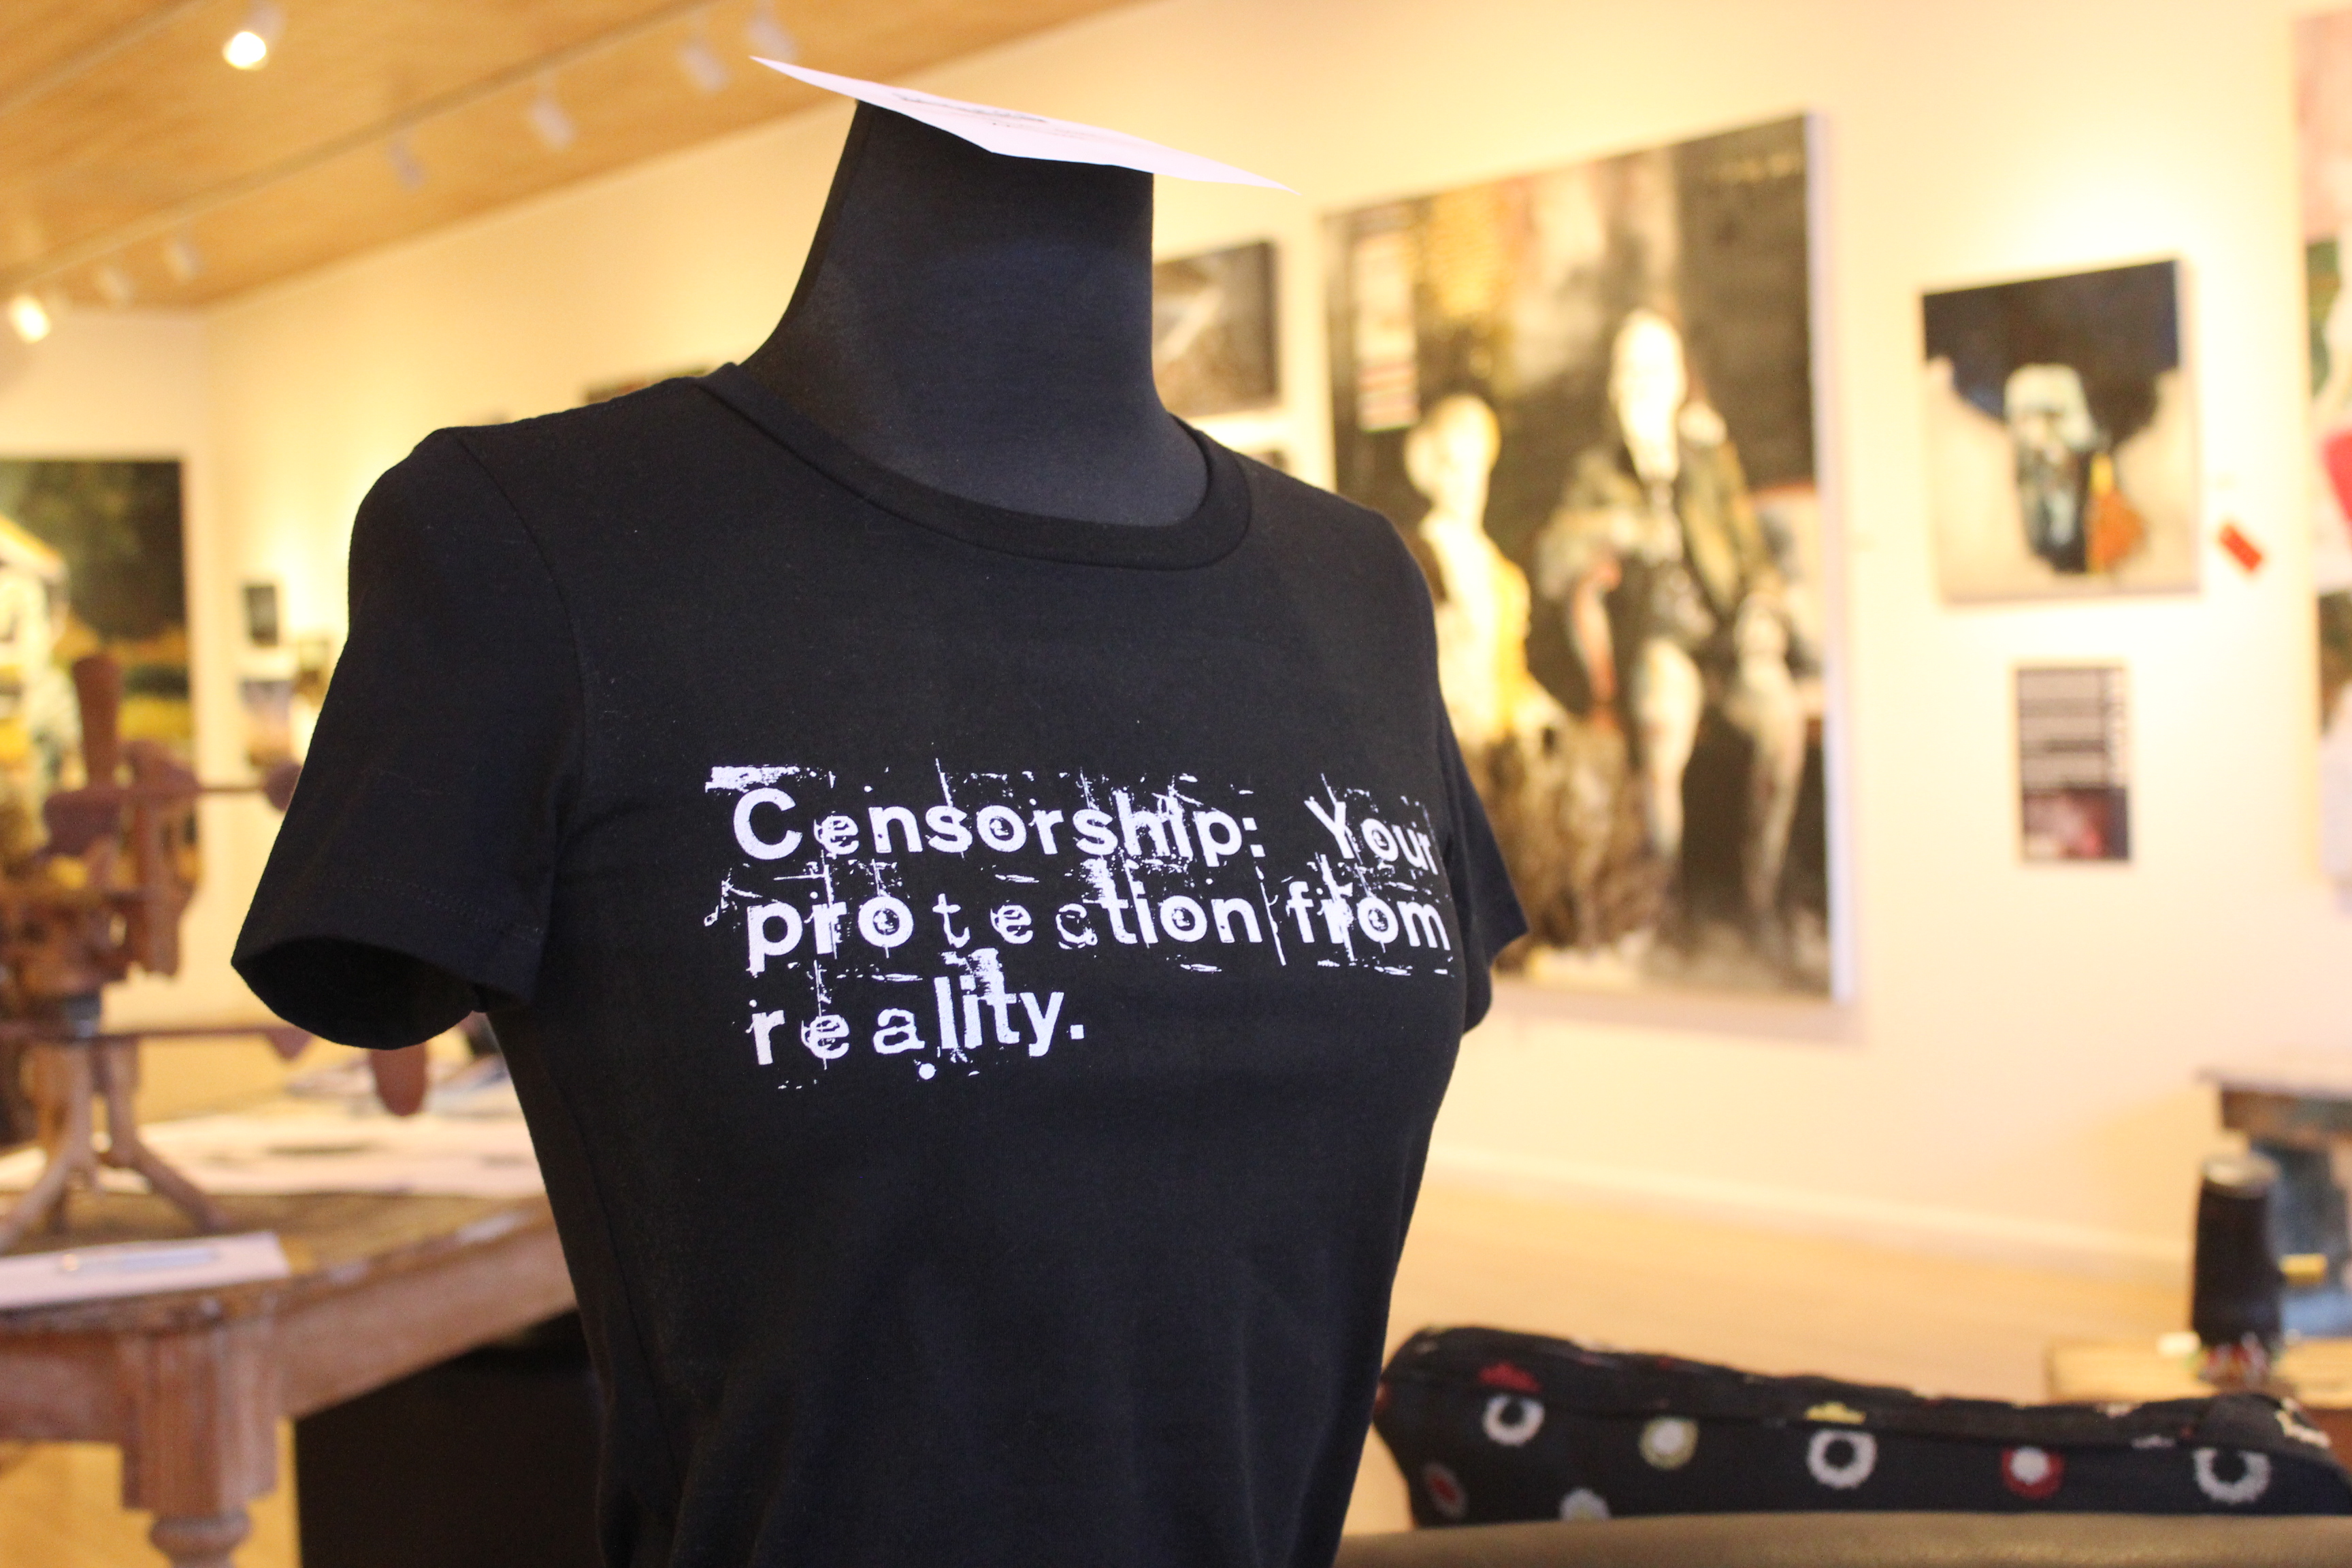 Shirts being sold at Sam Poe Gallery during "The Uncensored Show" Photograph by Tessa Patterson